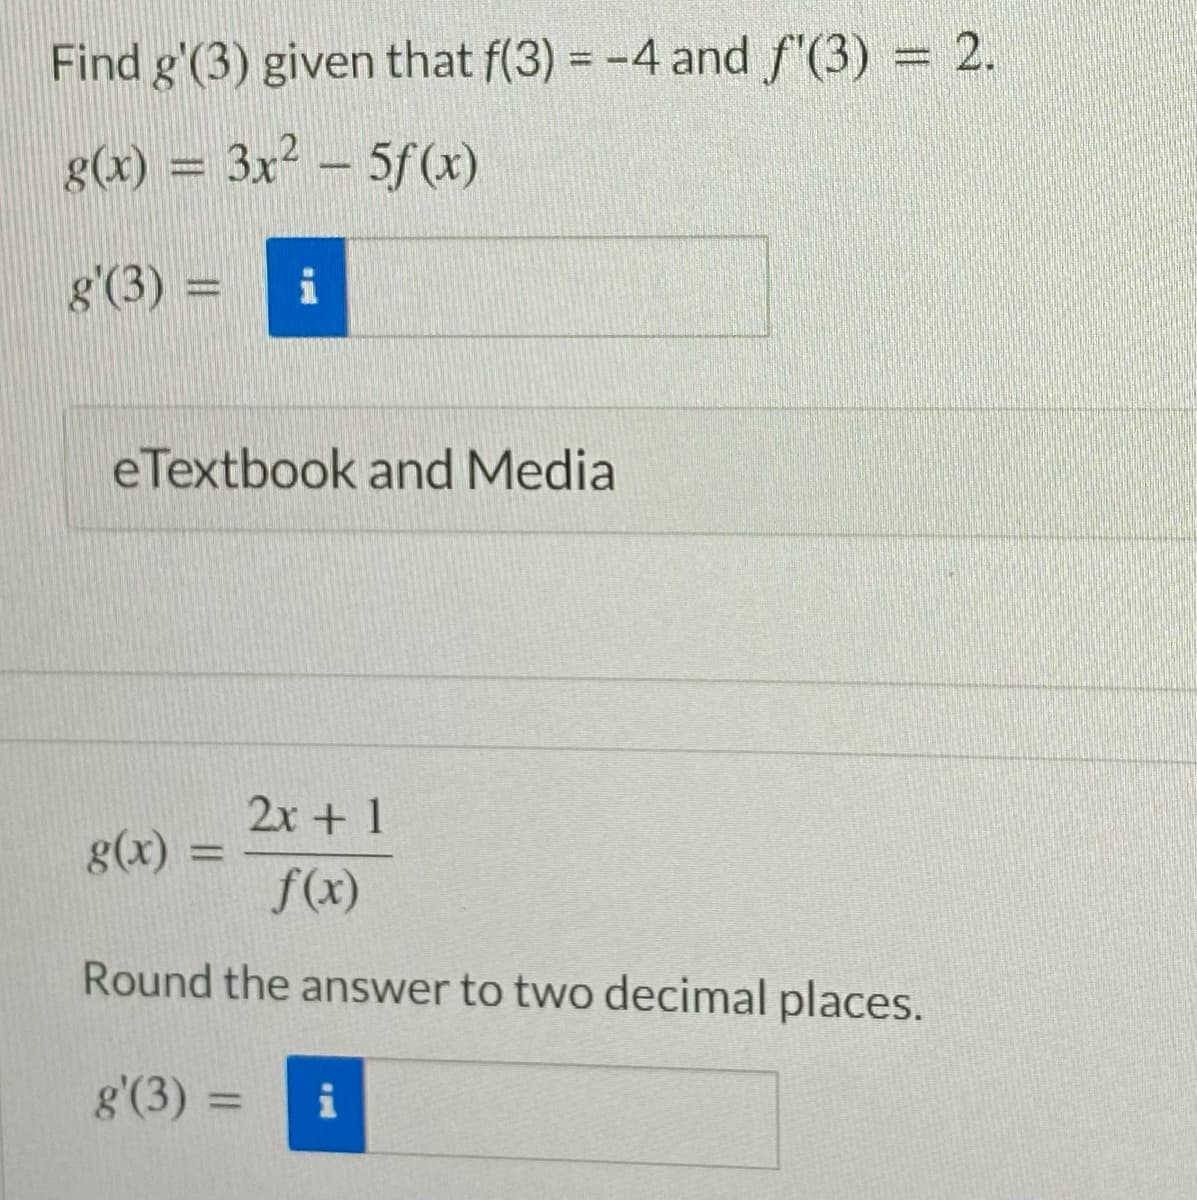 Find g'(3) given that f(3) = -4 and f'(3) = 2.
g(x) = 3x² - 5f (x)
g'(3) = i
eTextbook and Media
2x + 1
f(x)
Round the answer to two decimal places.
g'(3)
g(x) =
=
= i